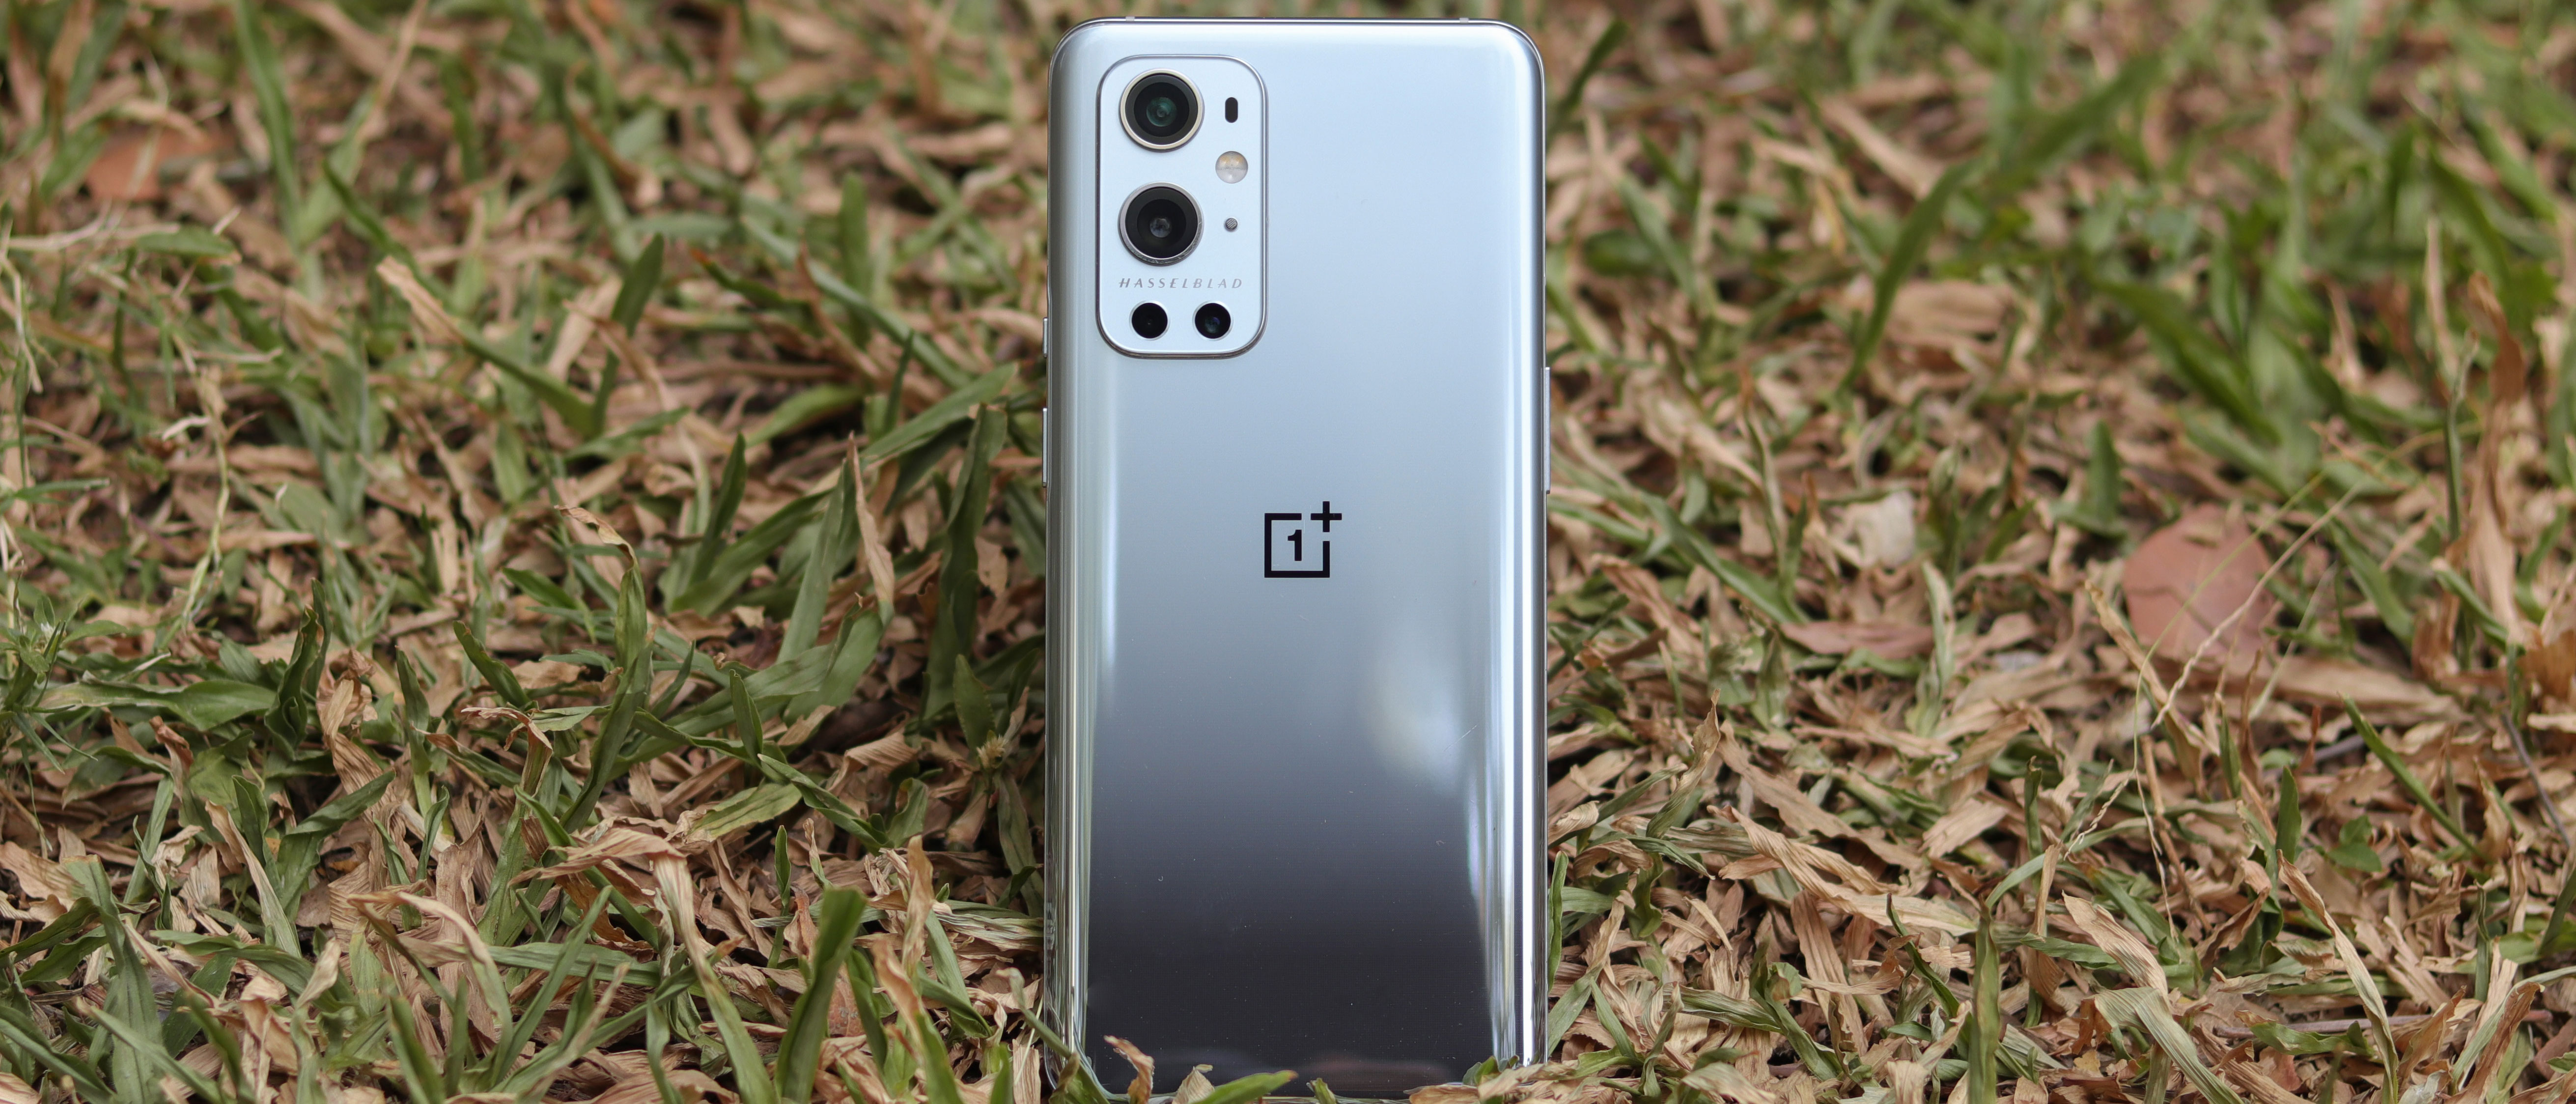 OnePlus 9, OnePlus 9 Pro unveiled: Price, release date, specs and more